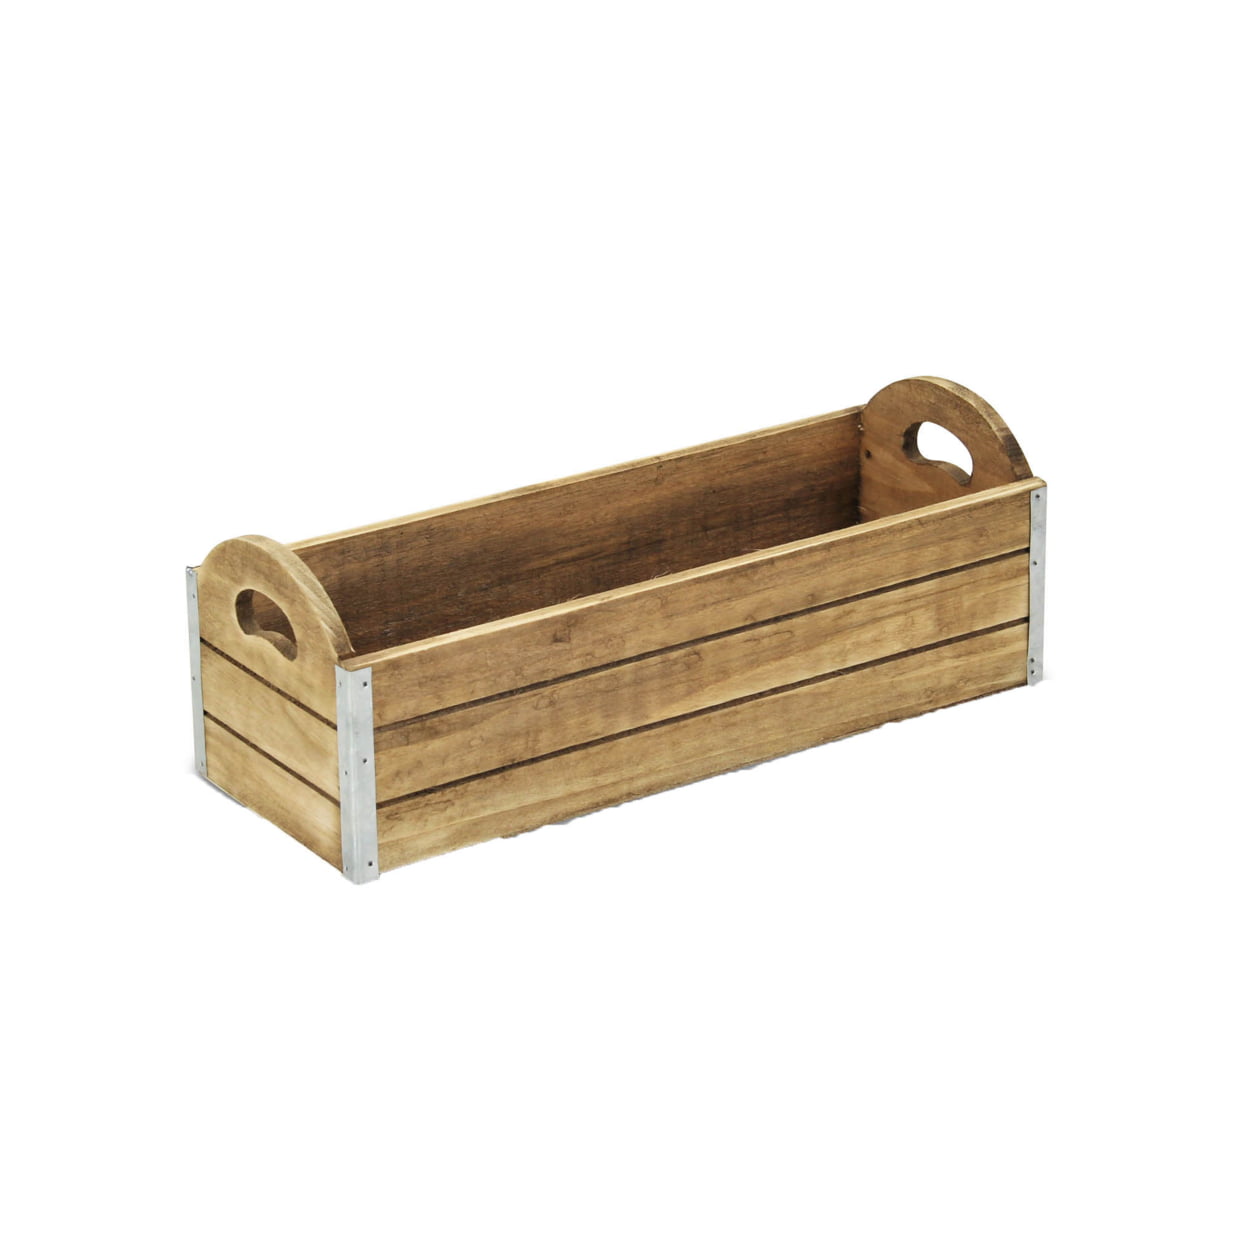 4744 Wooden Ledge Planter With Metal Border Accents